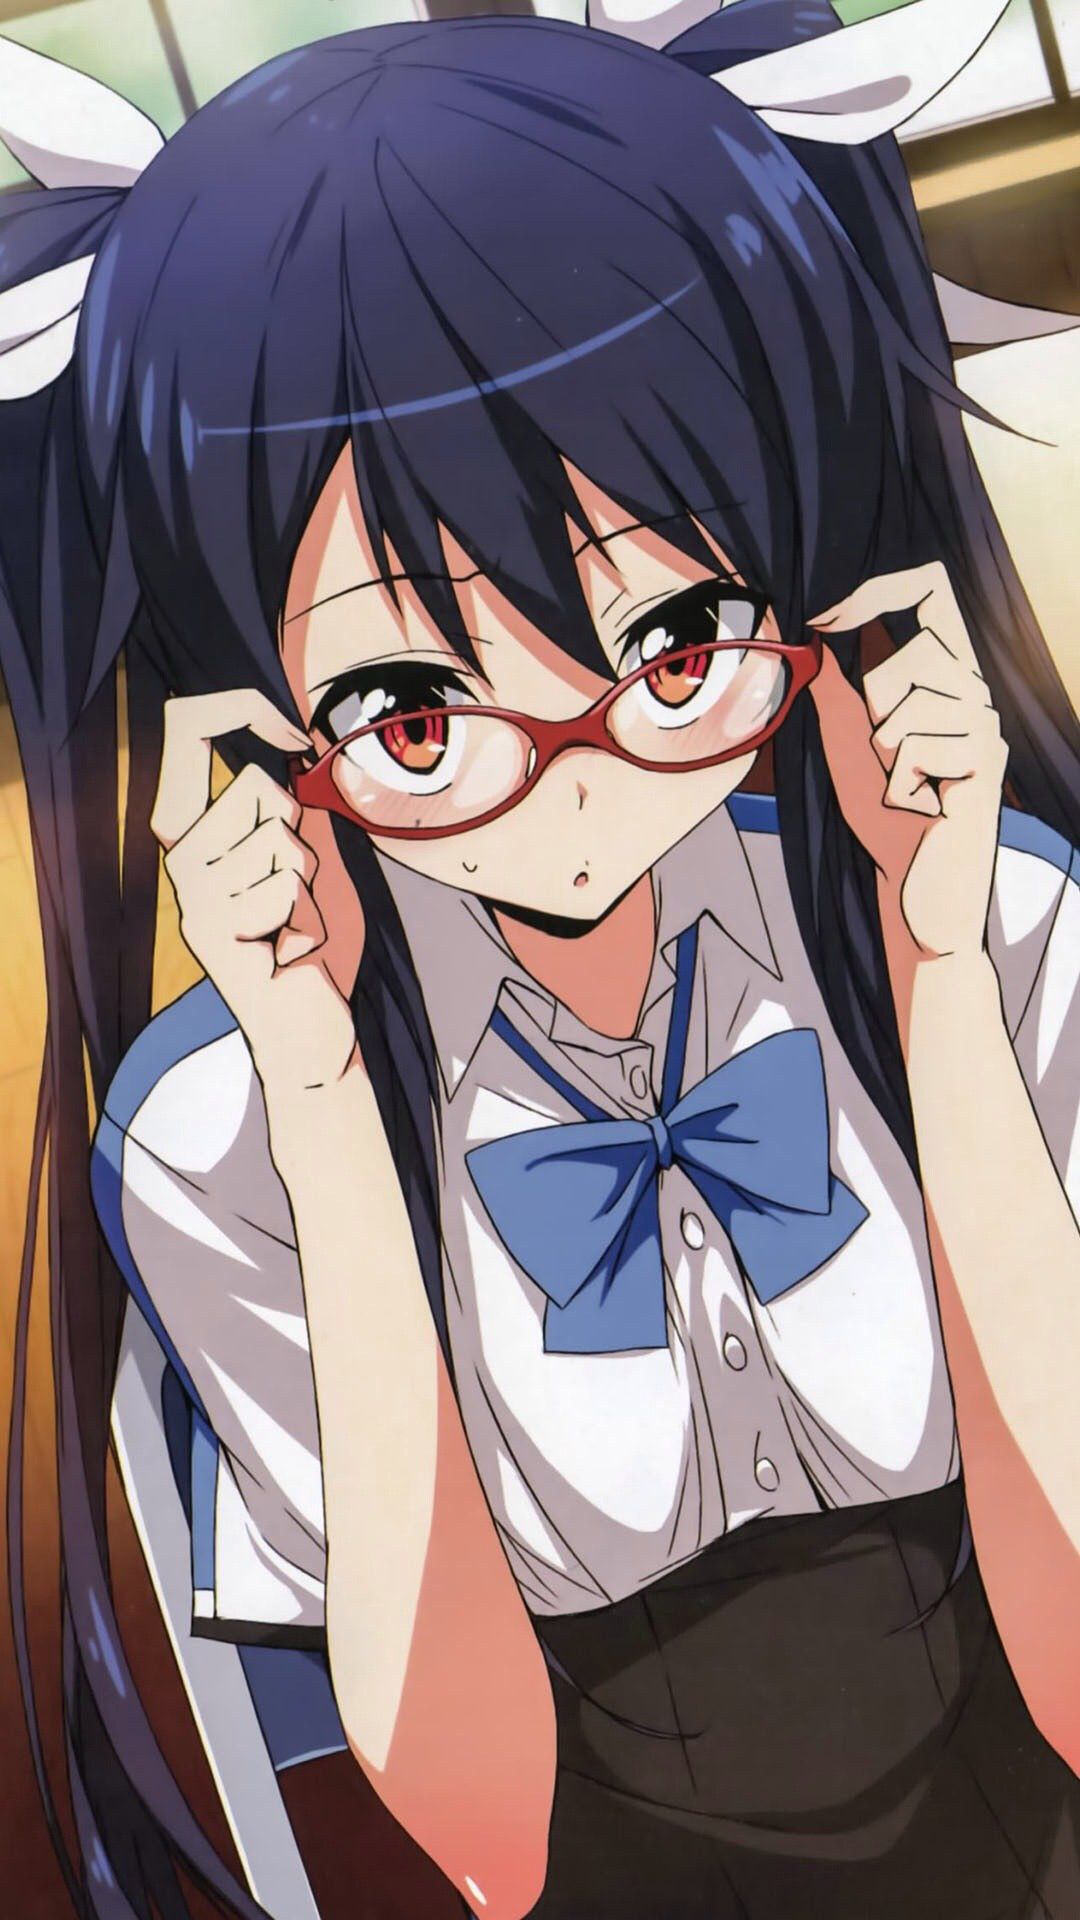 [Secondary] glasses girl Hooray! [Images] part 4 26